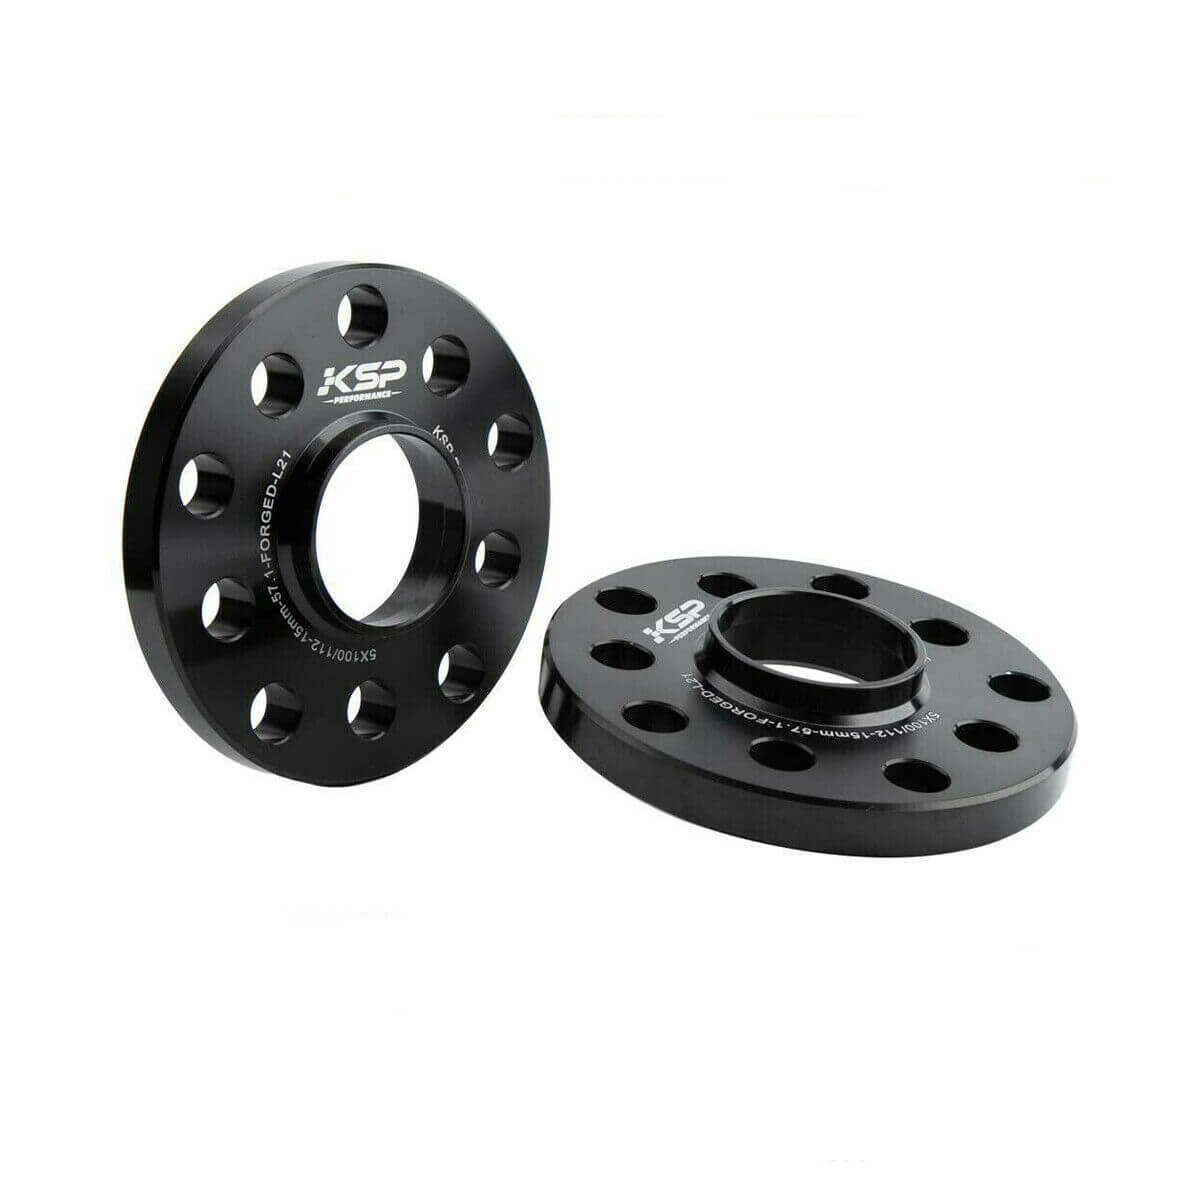 Hubcentric Wheel Spacers 2PC 5x100 5x112 For Audi & Volkswagen 57.1mm CB xccscss.